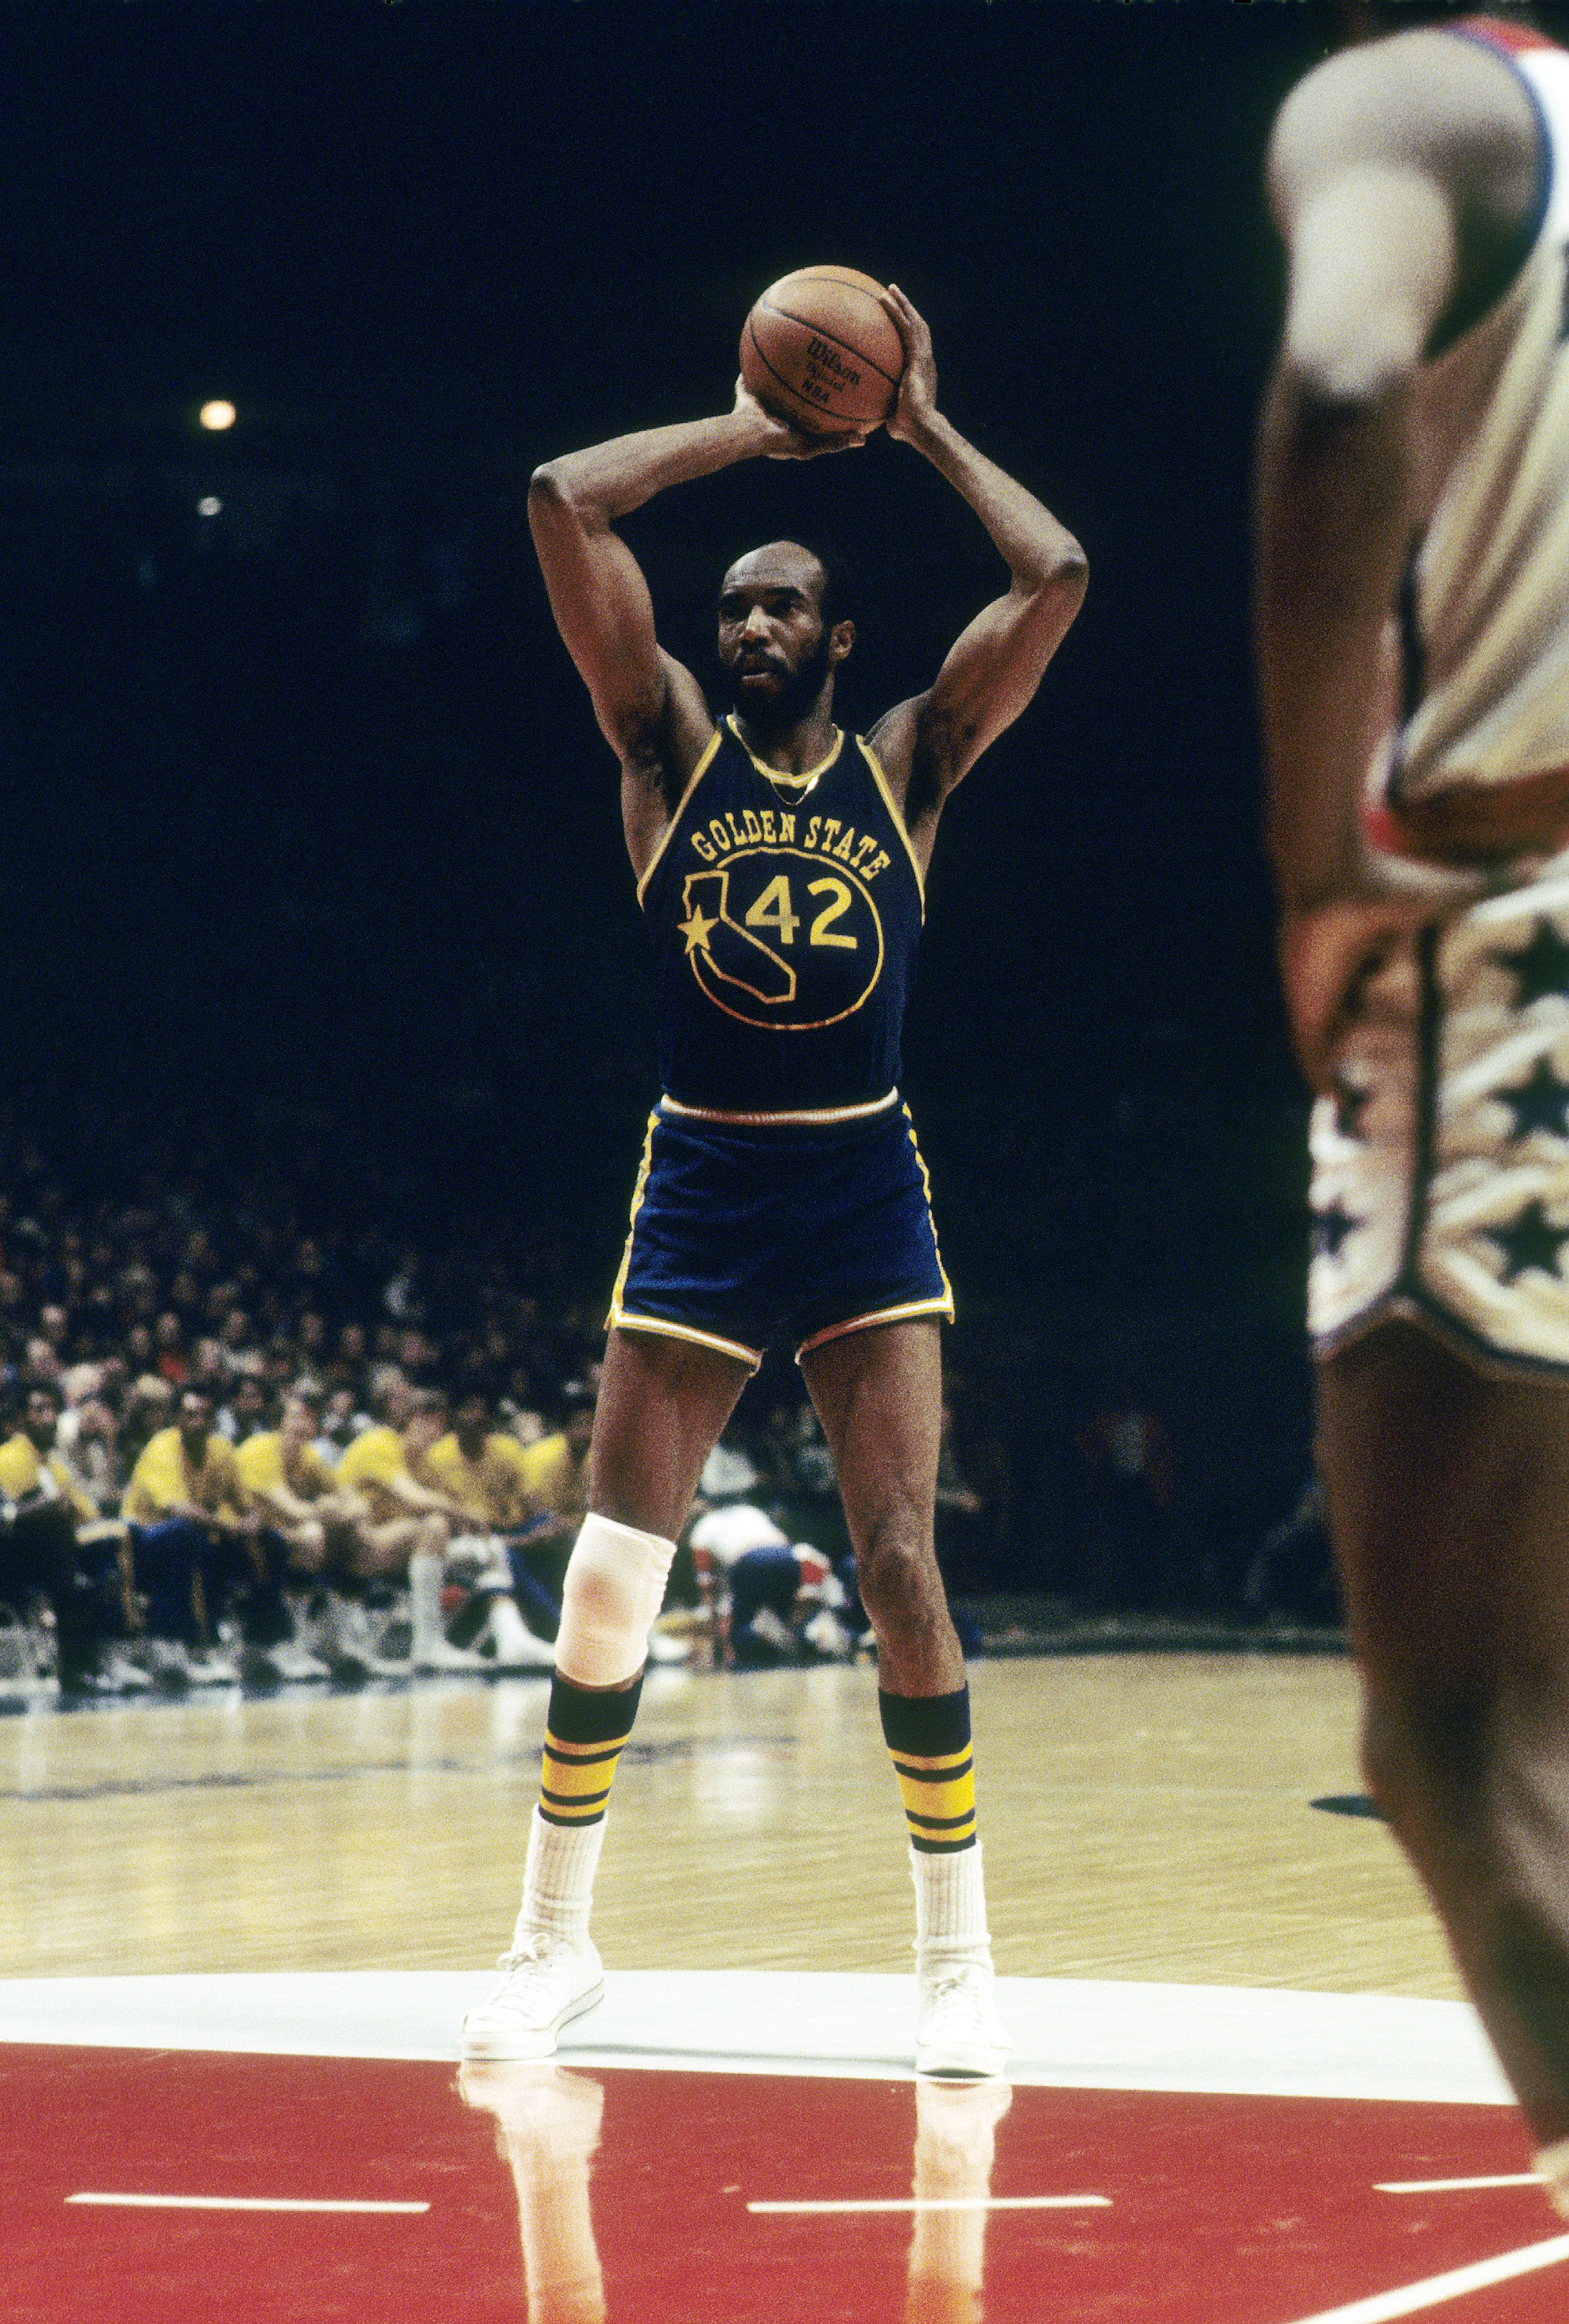 Watch: Remembering Hall of Fame center Nate Thurmond